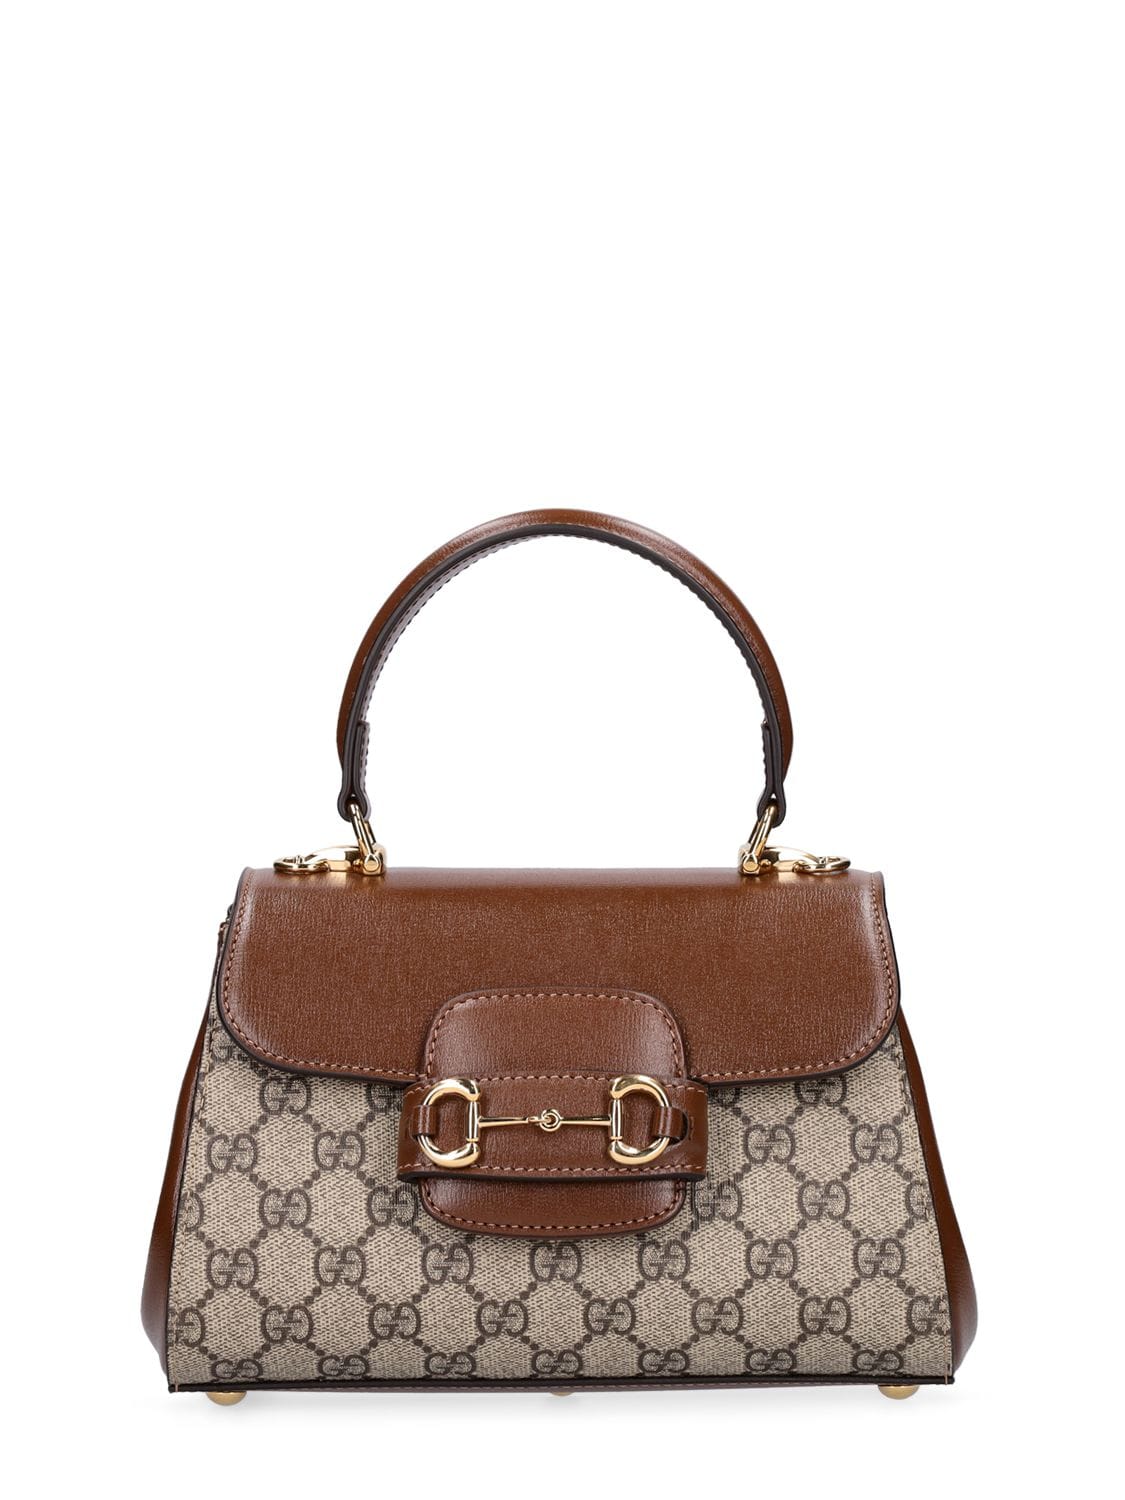 Gucci 1955 Horsebit Gg Canvas & Leather Bag In Brown Beige